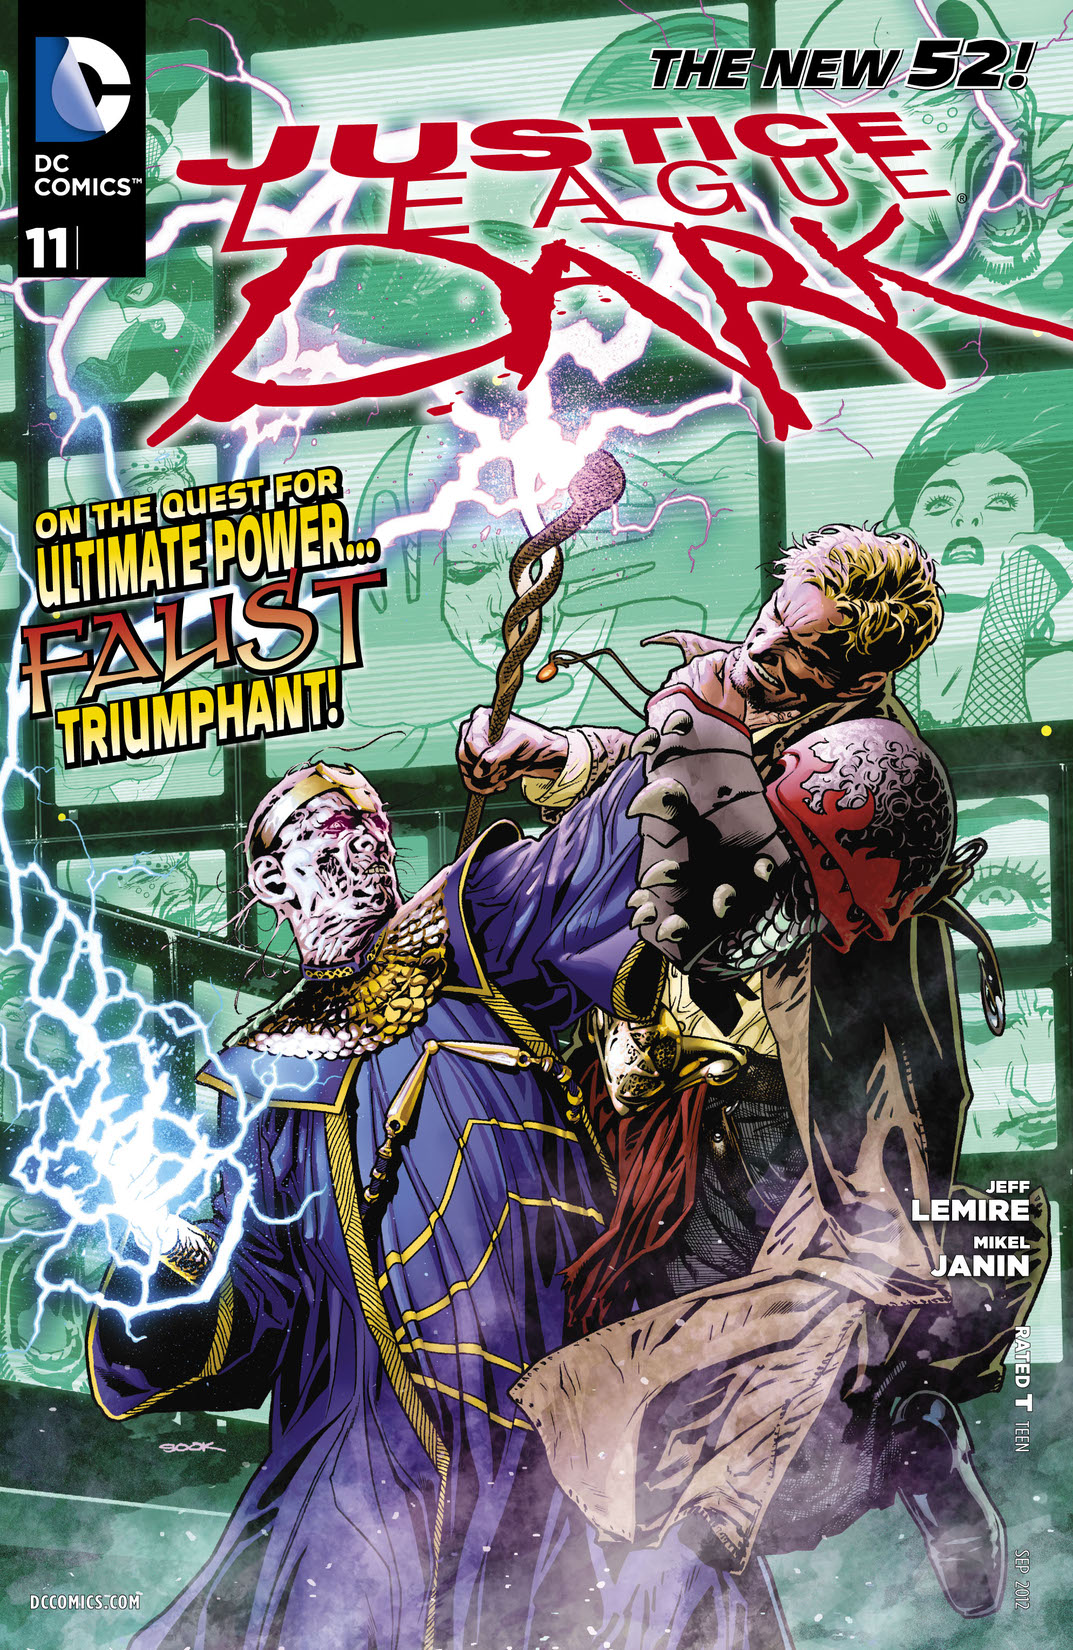 Justice League Dark (2011-) #11 preview images